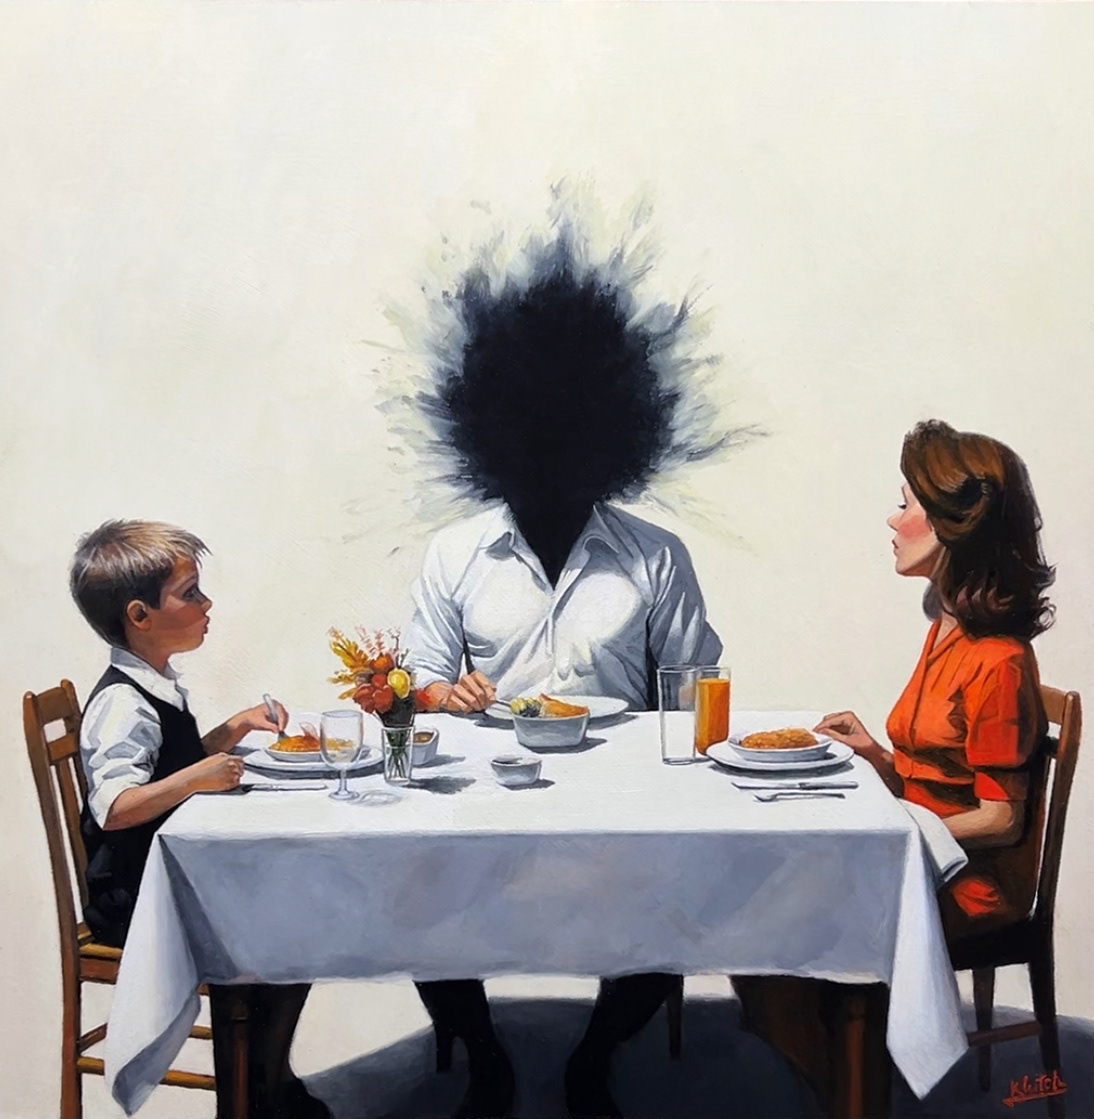 painting   painter surreal symbolism Dinner Table boy